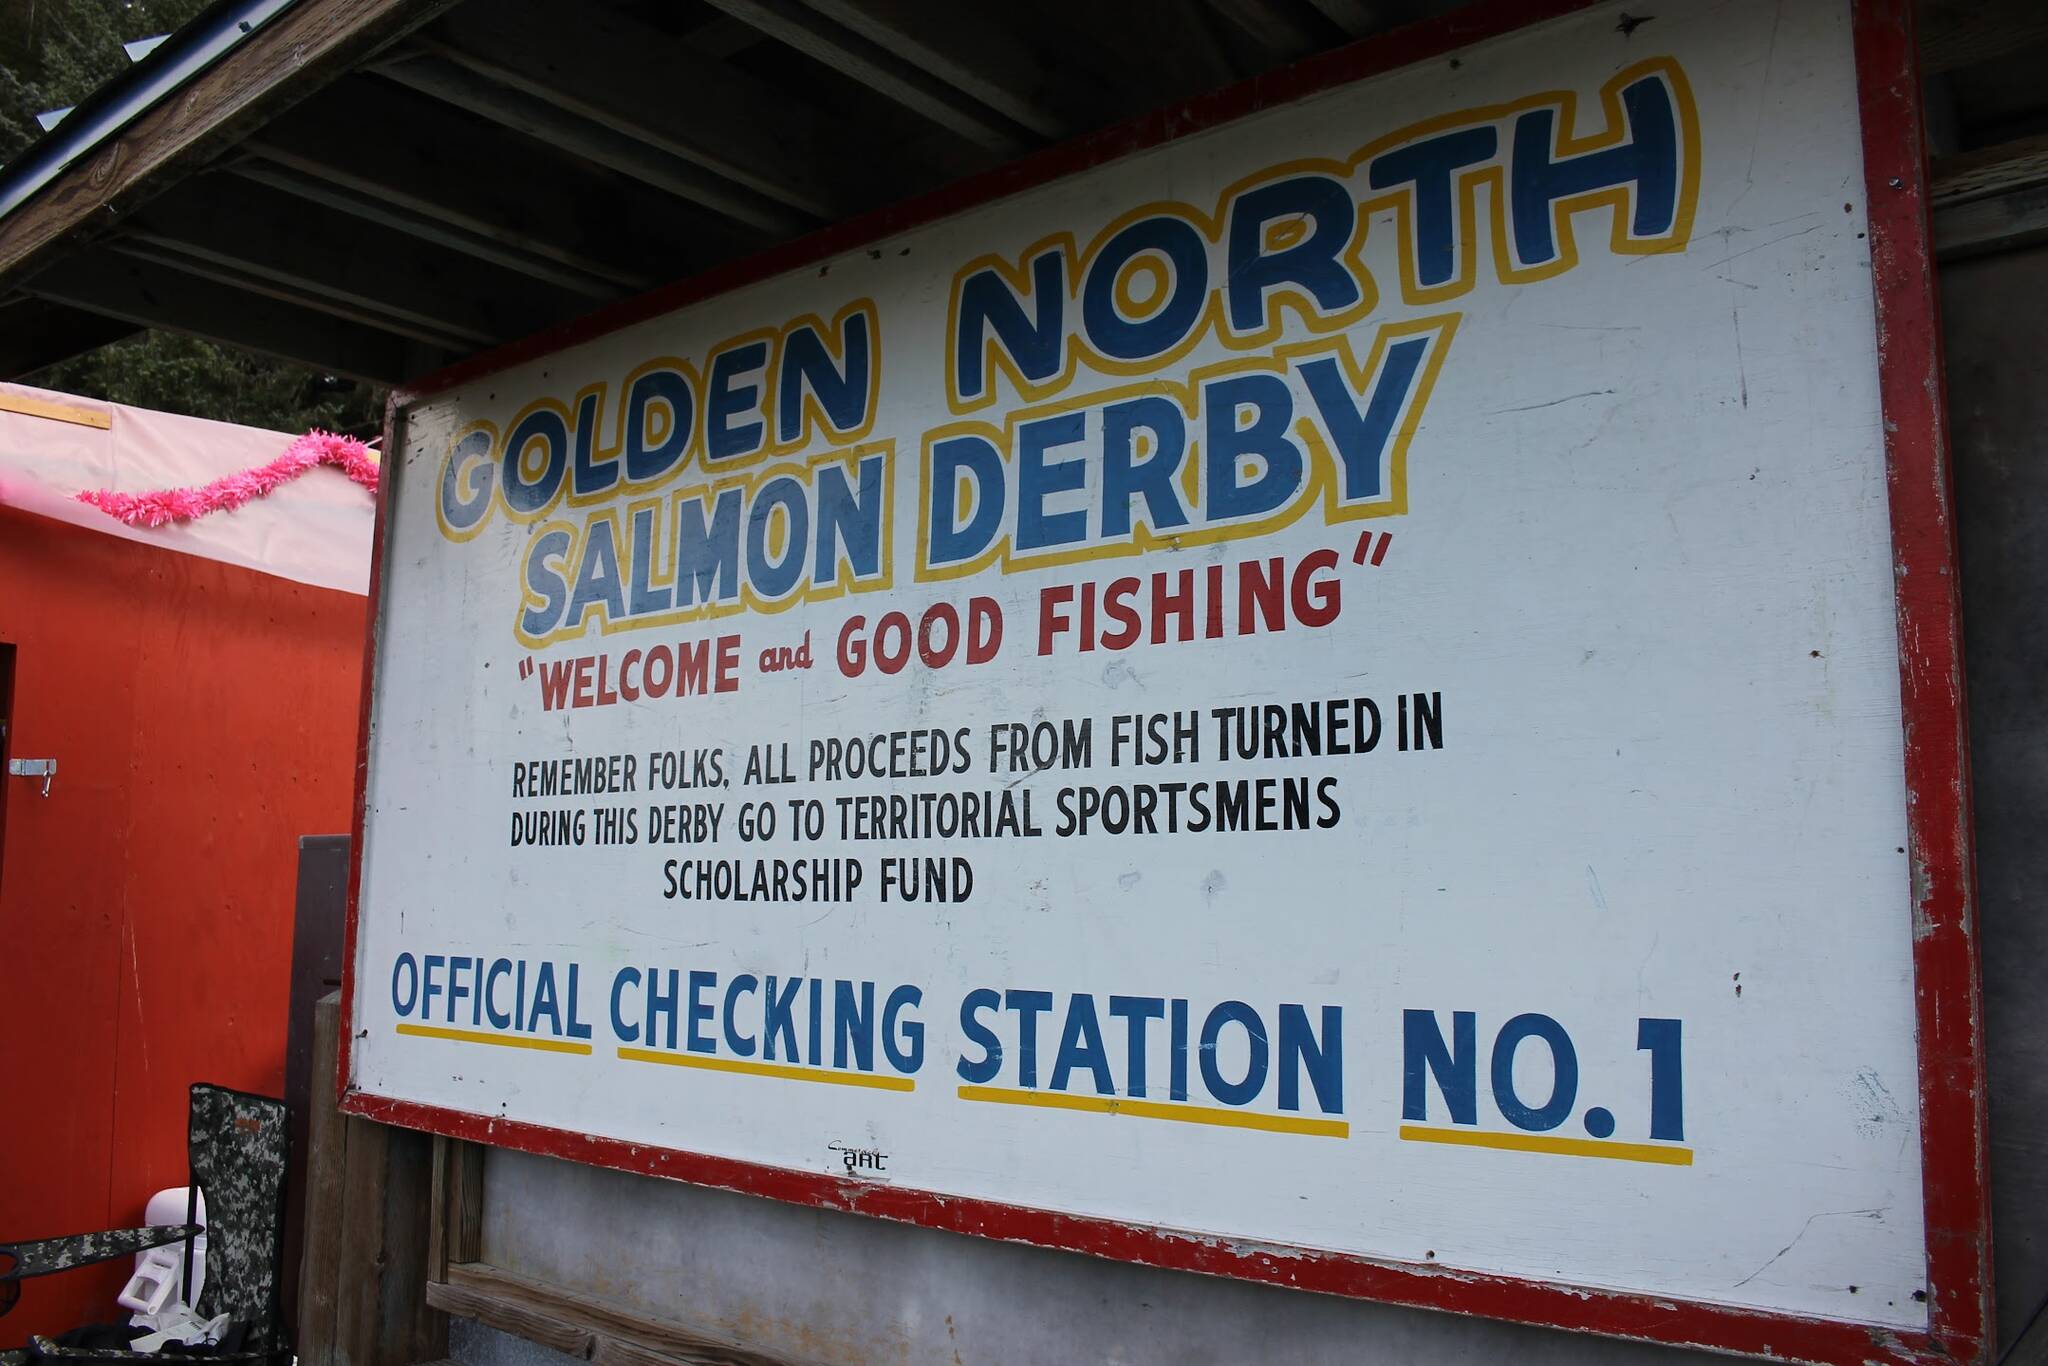 2022 marks the 76th year the Goldern North Salmon Derby has existed in Juneau. The derby, which also doubles as a fundraiser, has raised nearly $2 million and given scholarships to more than 300 local high school and graduate students. (Clarise Larson / Juneau Empire)